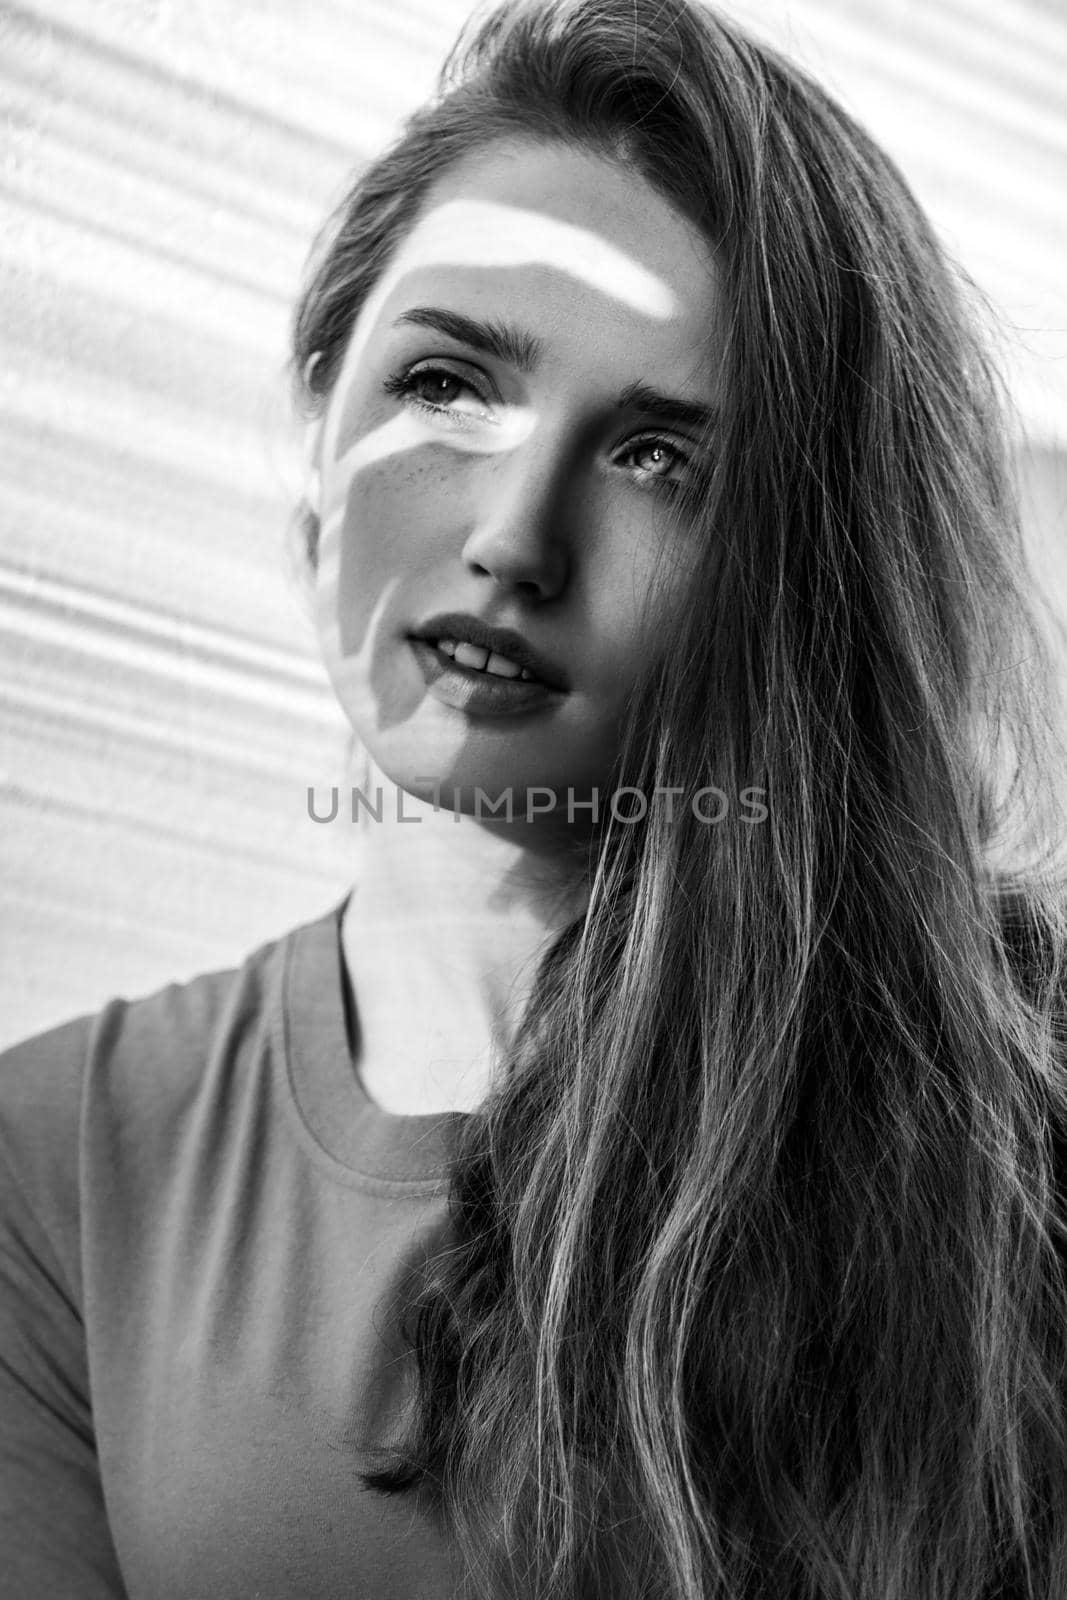 Closeup portrait of attractive woman with natural makeup looking away with romantic and dreamy expression. Black and white photography, indoor studio shot illuminated by sunlight from window.